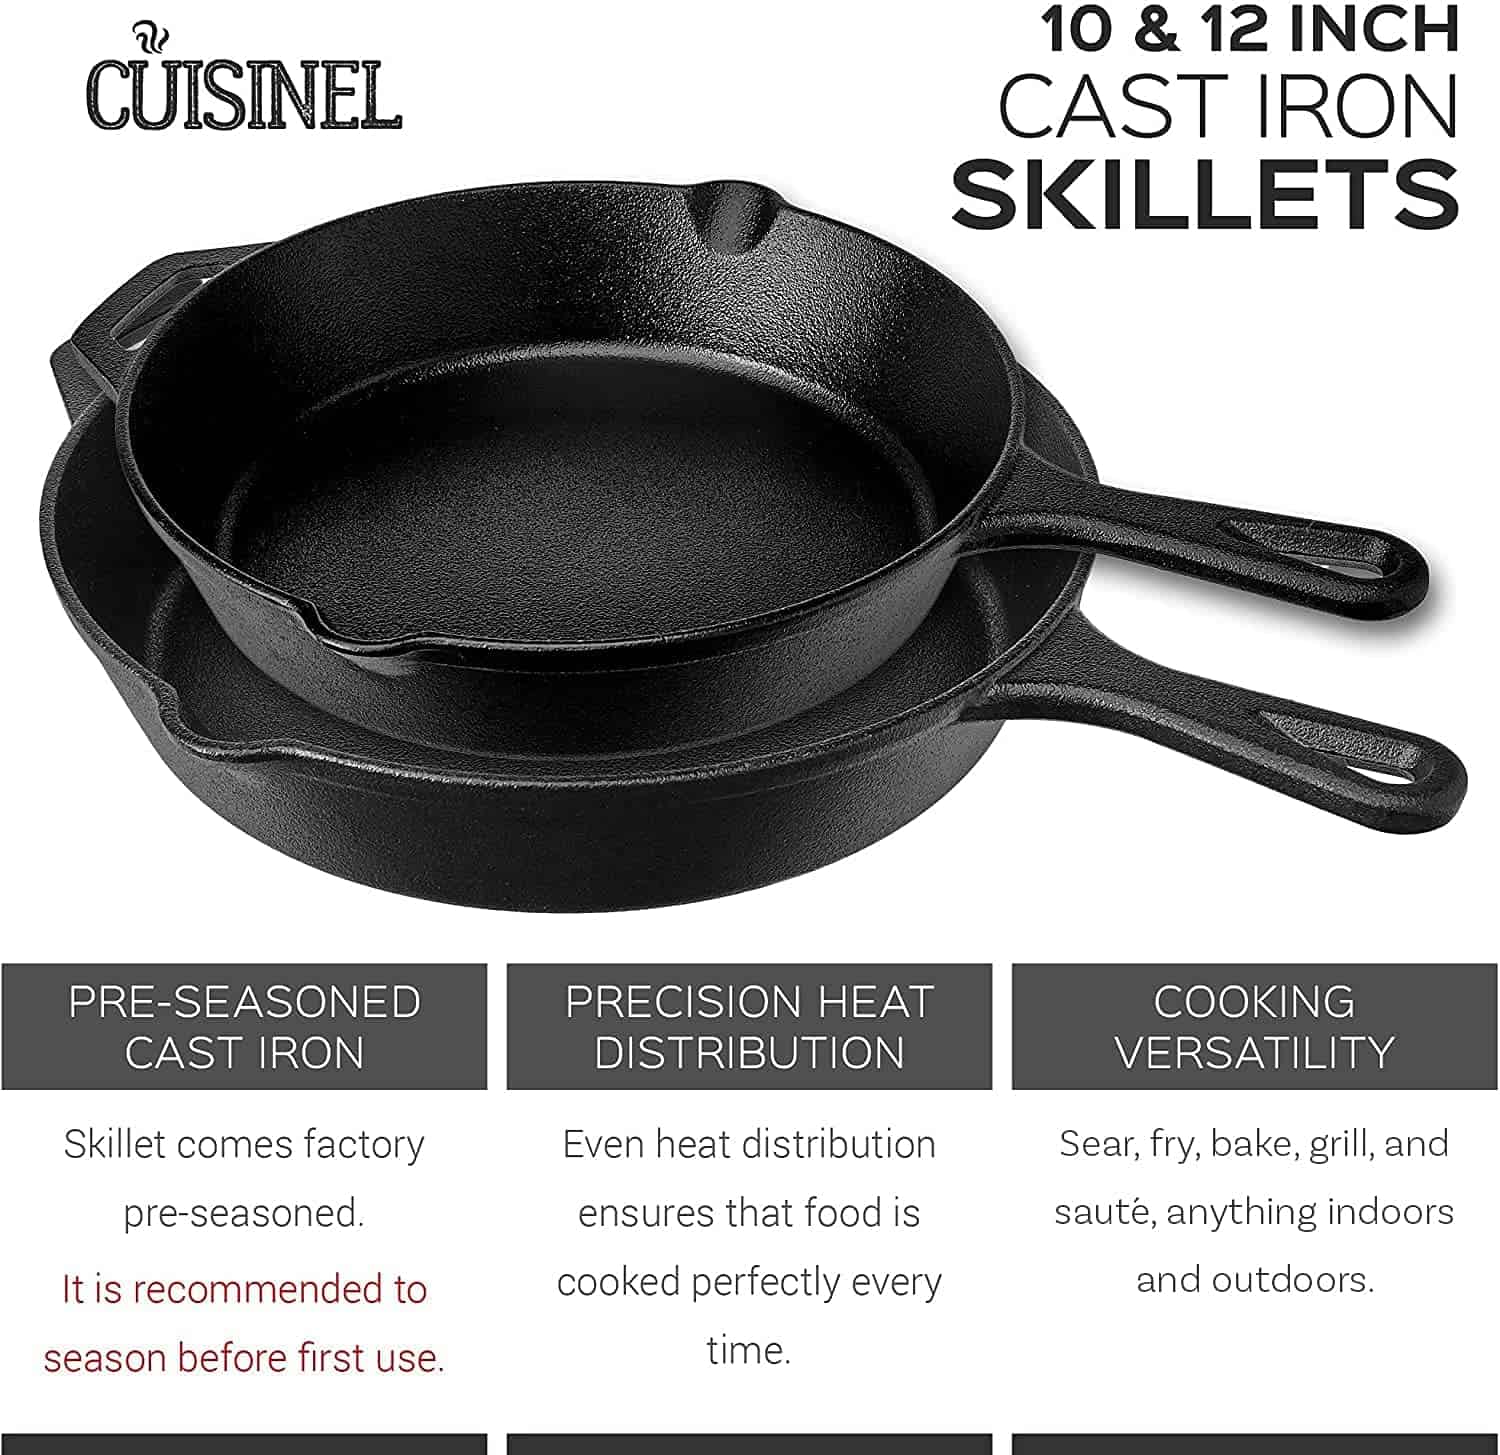 Two Cuisinel cast iron skillets stacked on top of each other. Image also lists main points.